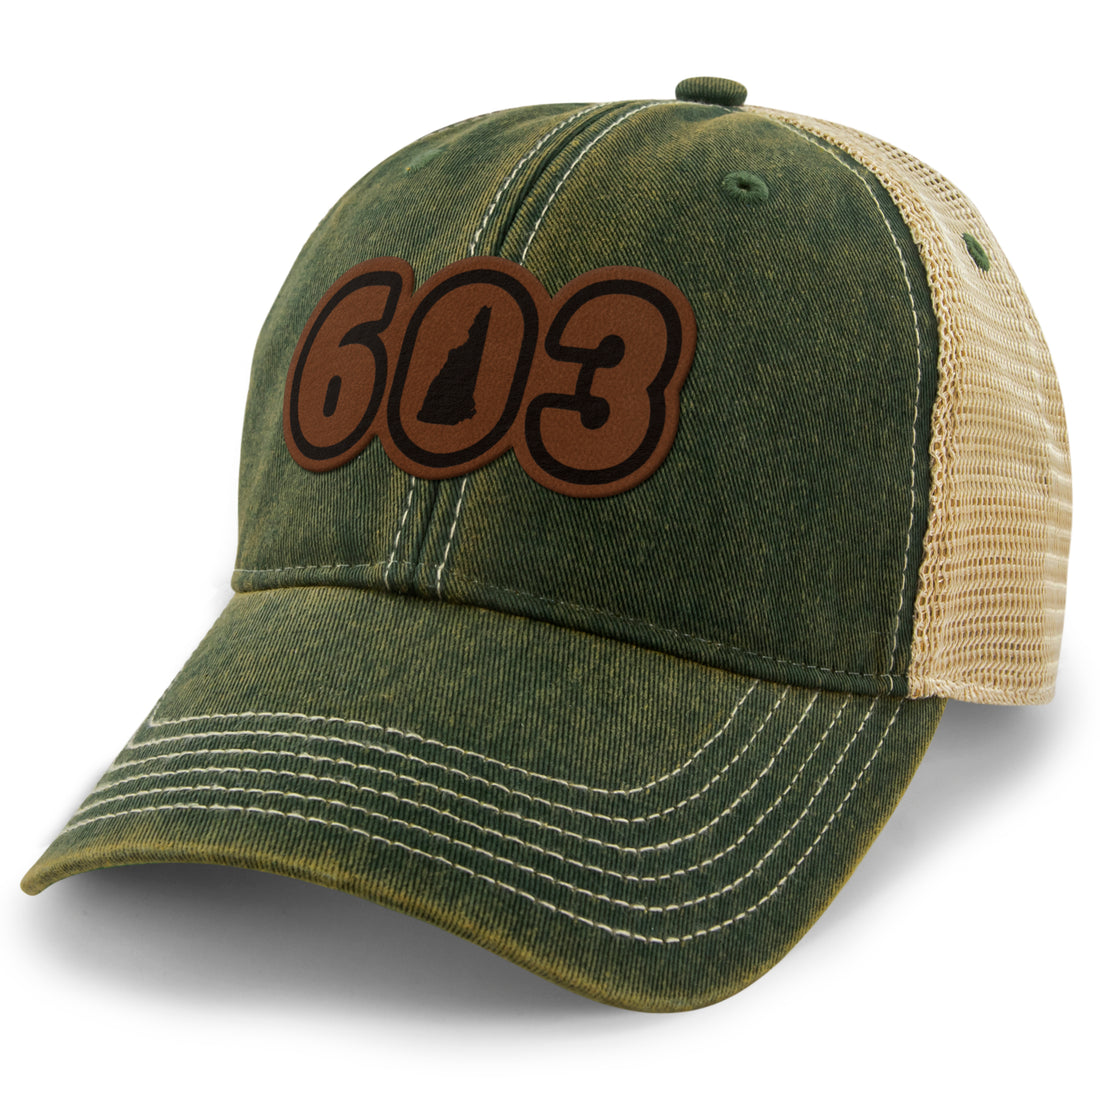 603 NH Leather Patch Relaxed Trucker - Chowdaheadz